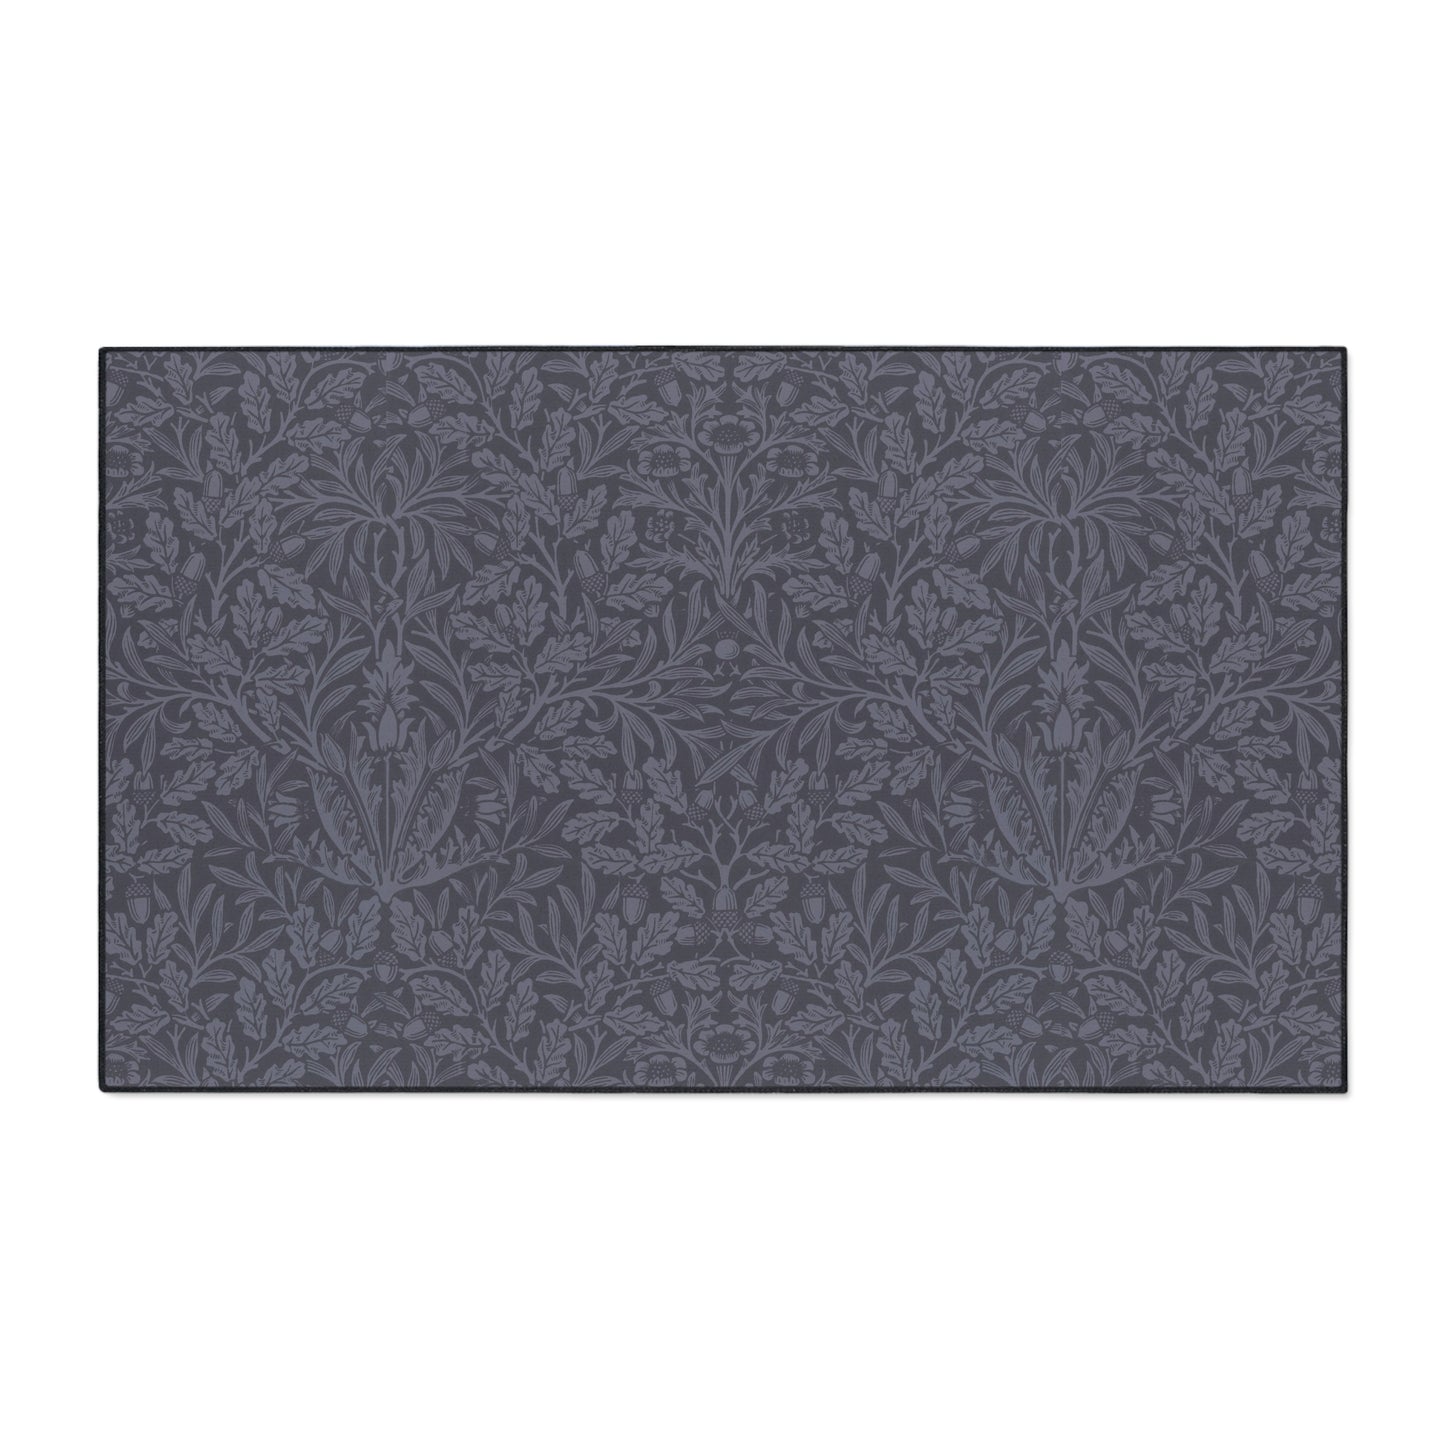 william-morris-co-heavy-duty-floor-mat-acorns-and-oak-leaves-collection-smoky-blue-4